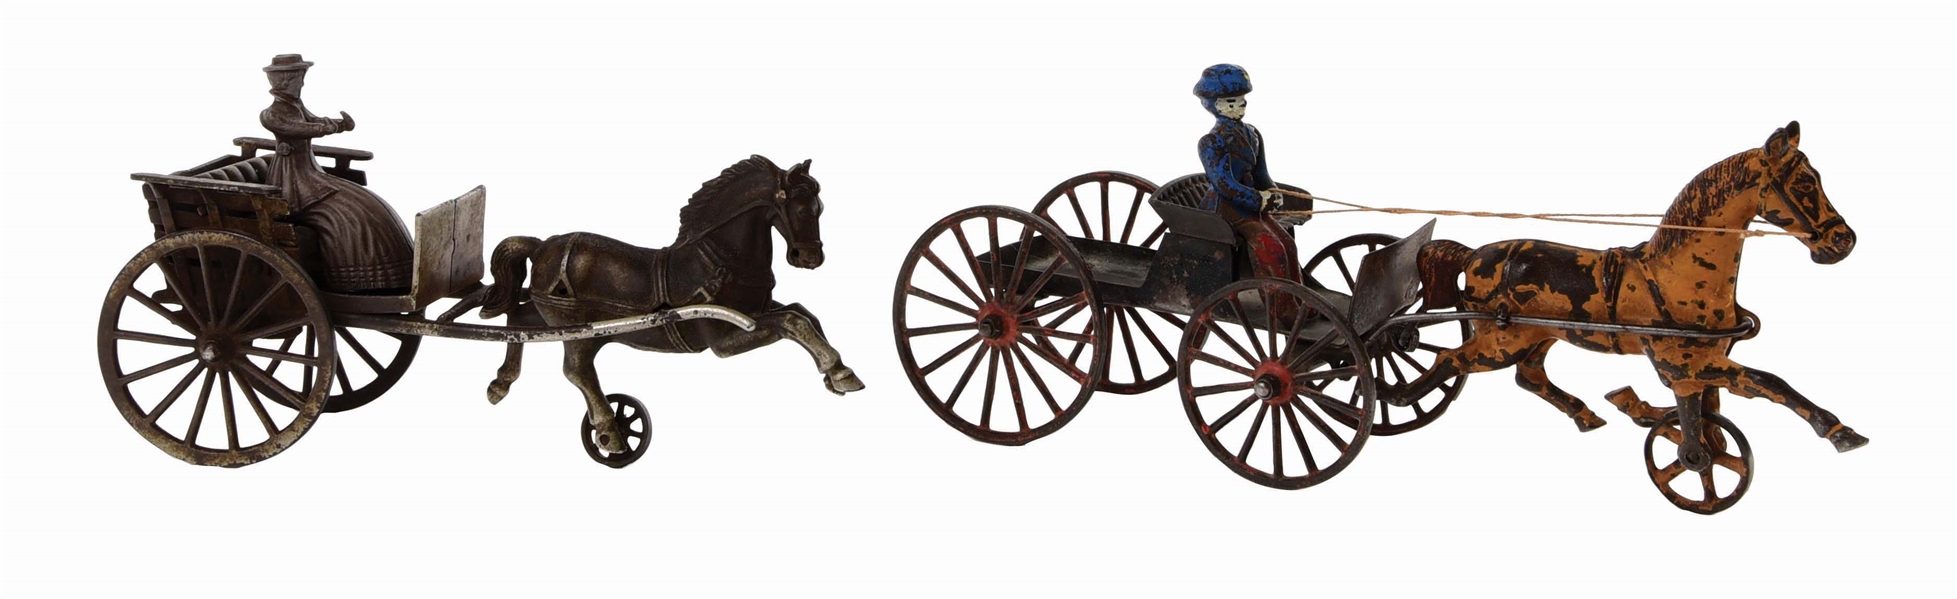 LOT OF 2: EARLY AMERICAN MADE HORSE-DRAWN CART TOYS.